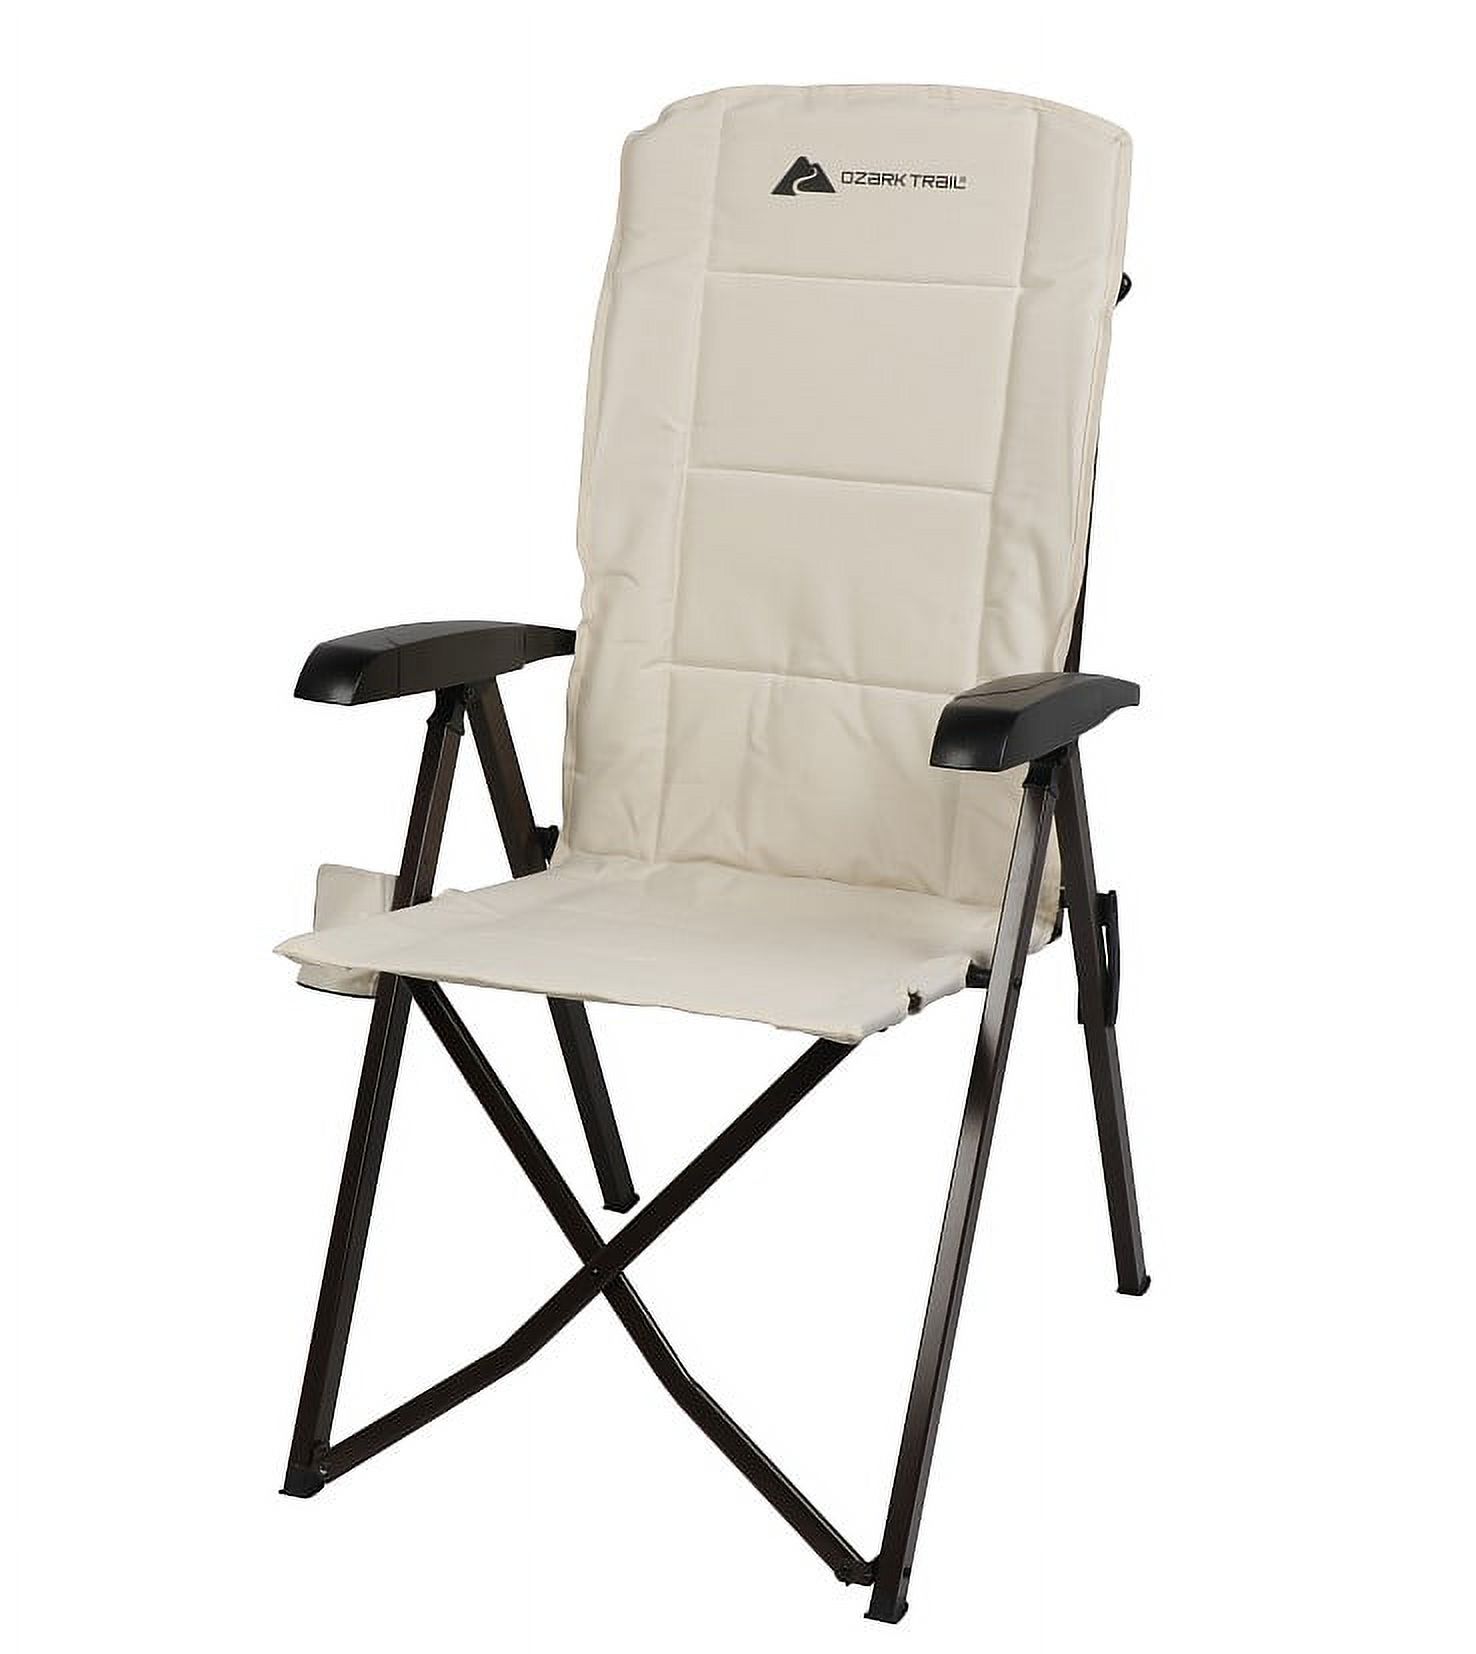 Ozark Trail Glamp High Back Lounge Chair, Adult, Taupe - image 3 of 7